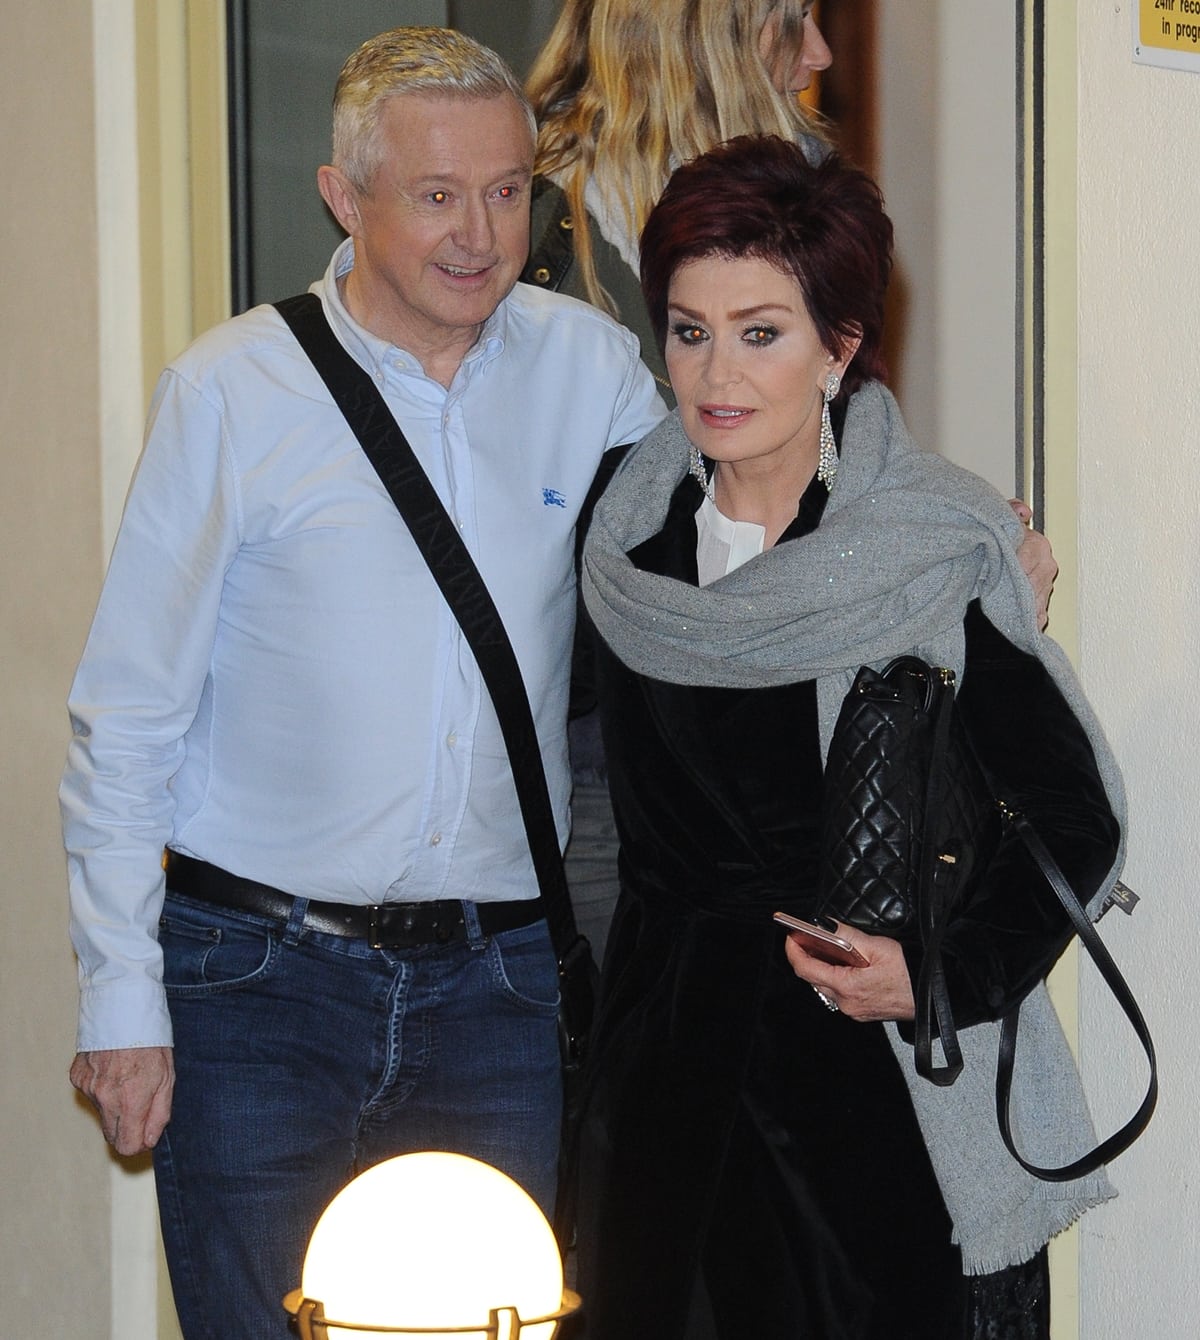 Louis Walsh and Sharon Osbourne attended a celebration to mark Sharon Osbourne's 64th birthday